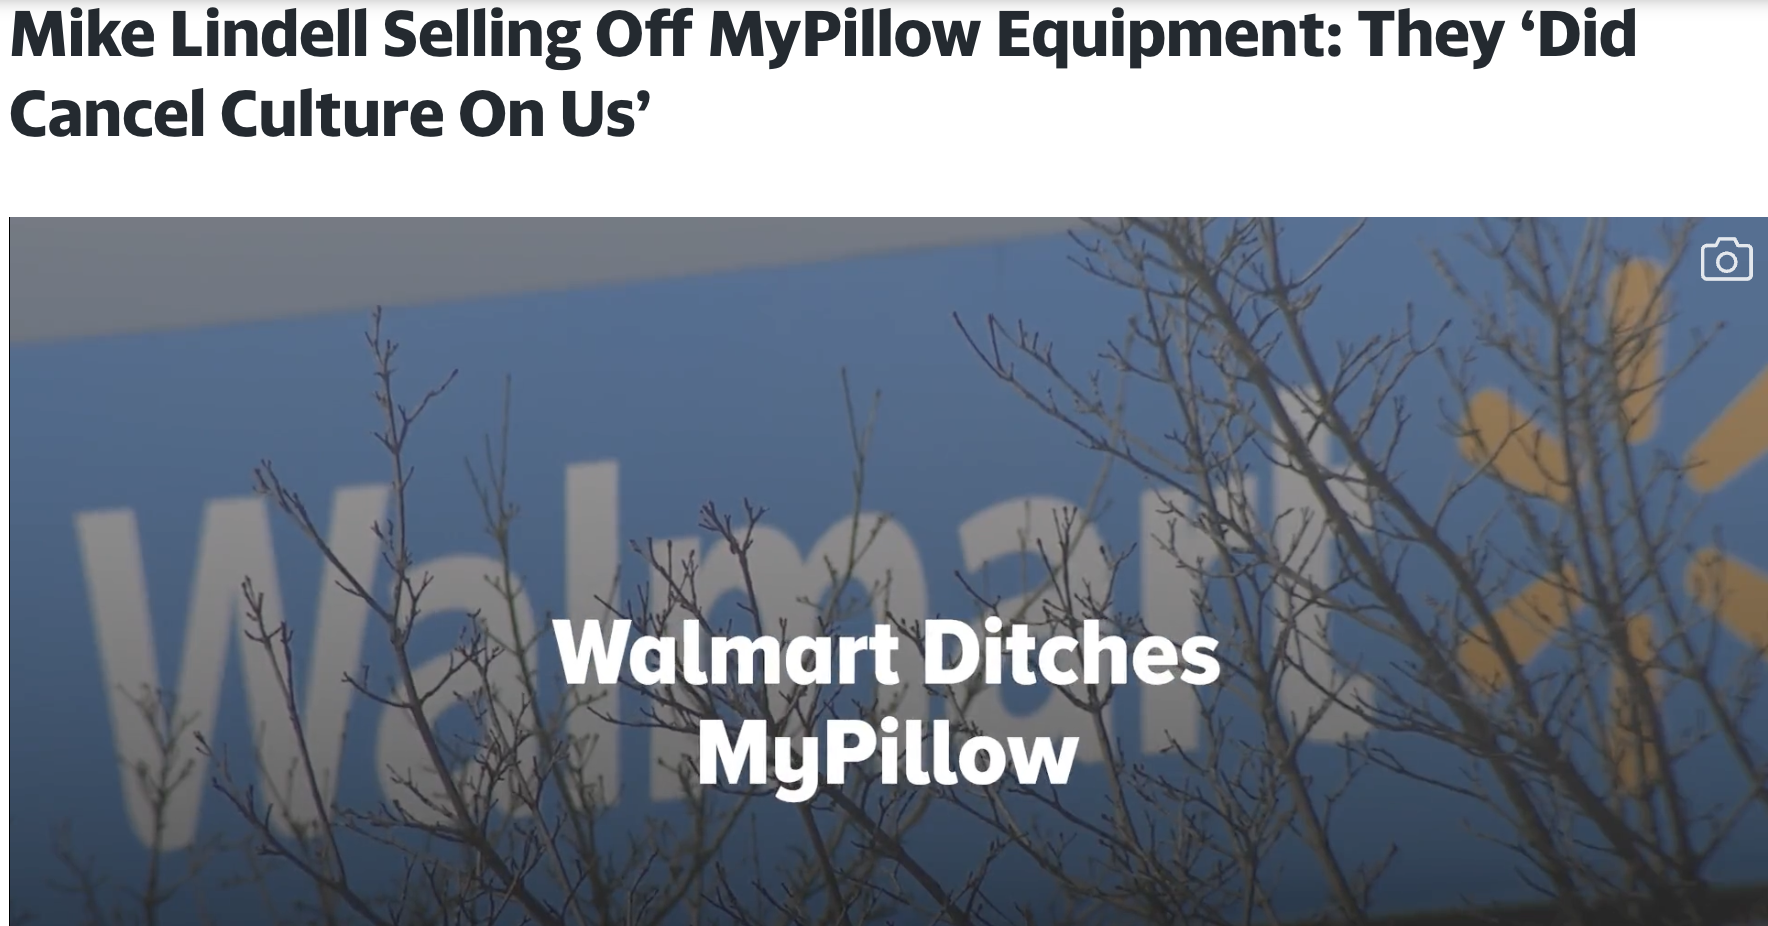 drake equation - Mike Lindell Selling Off MyPillow Equipment They 'Did Cancel Culture On Us' Wa Walmart Ditches MyPillow D